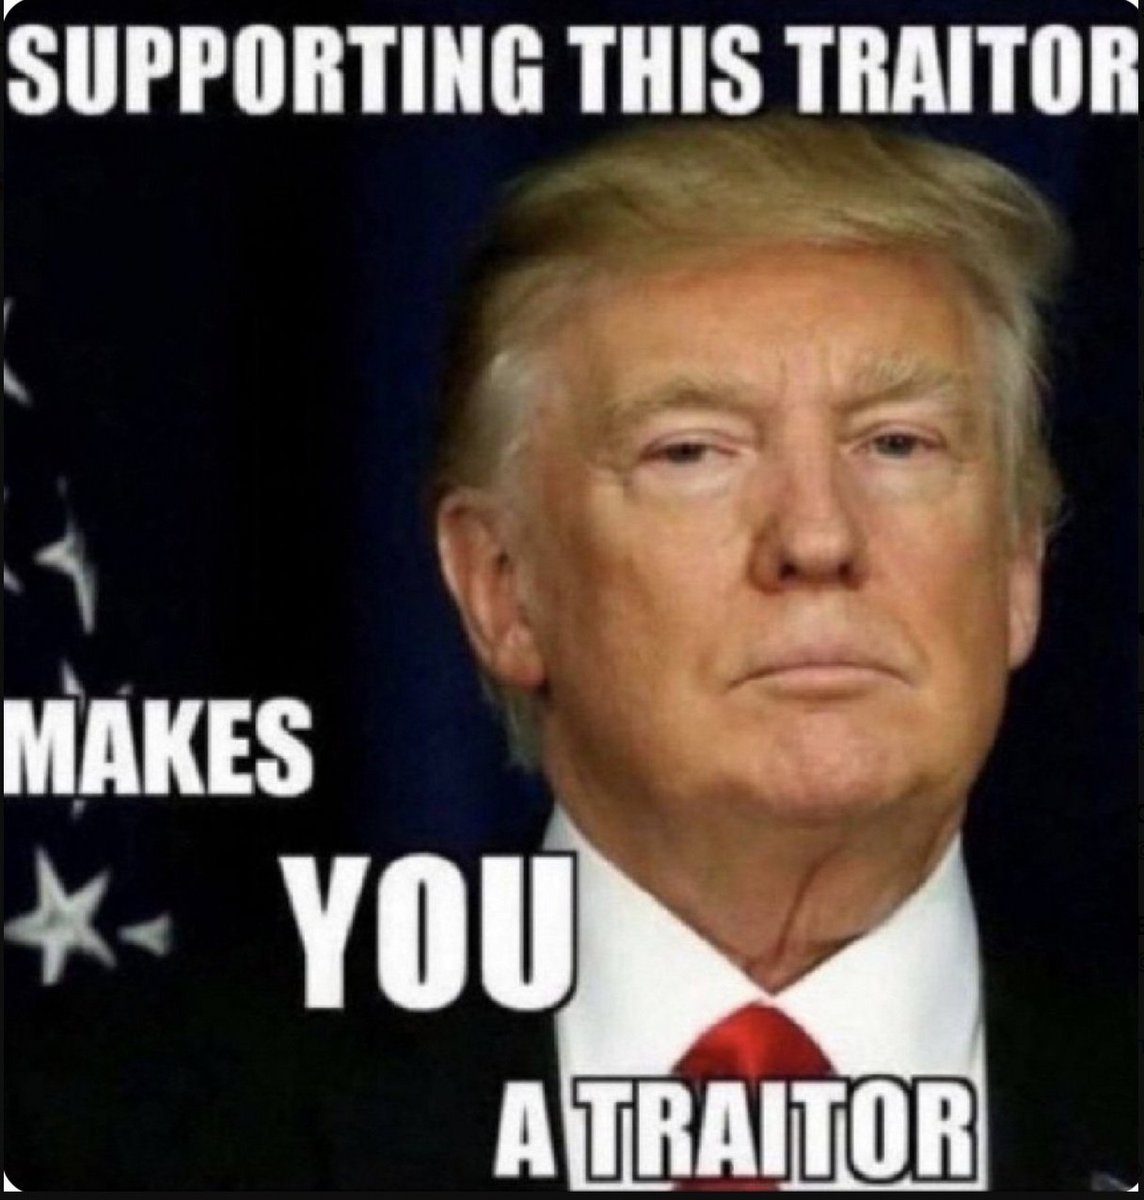 MAGA, you are not tough. You can't even stand up for your own country's principles. You attach yourself like a leech to Trump hoping to get close to power. Selling out your country in the process. #TrumpIsATraitorAndCriminal Lock him up